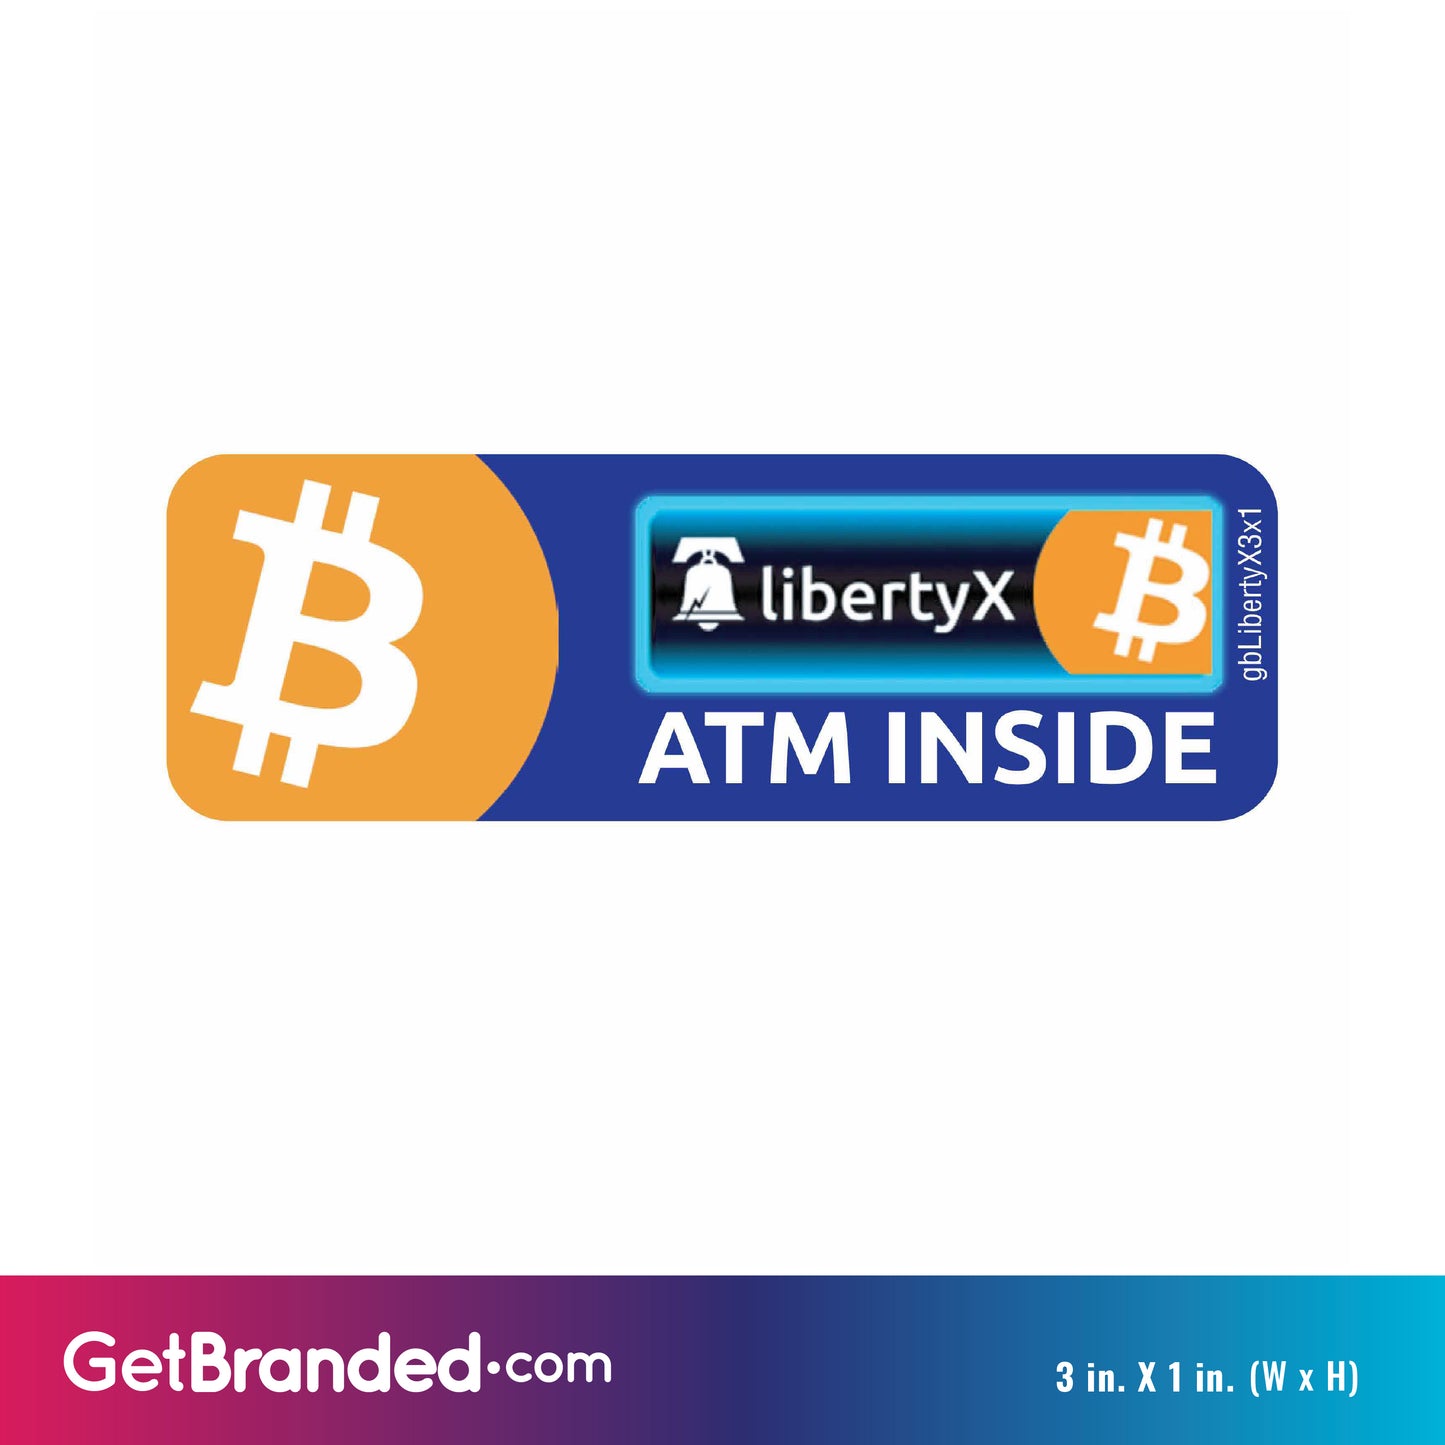 LibertyX ATM Inside Decal size guide. 3 inches by 1 inch in size.